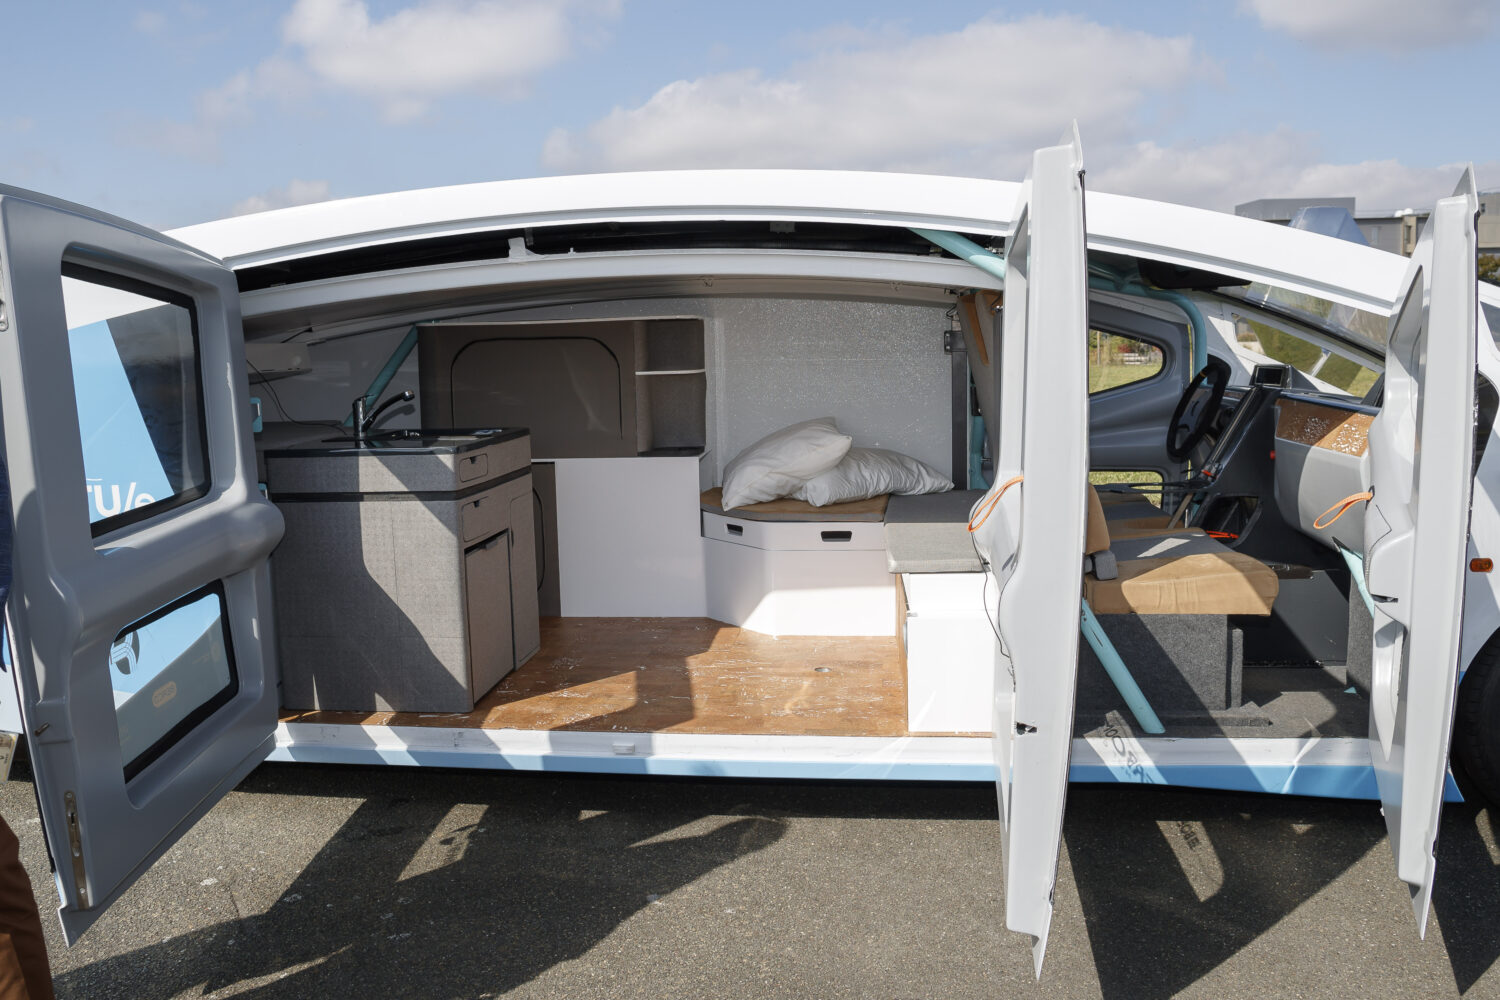 2021 - Story Mobilize - Stella Vita, a prototype solar-powered house on wheels inspiring Mobilize